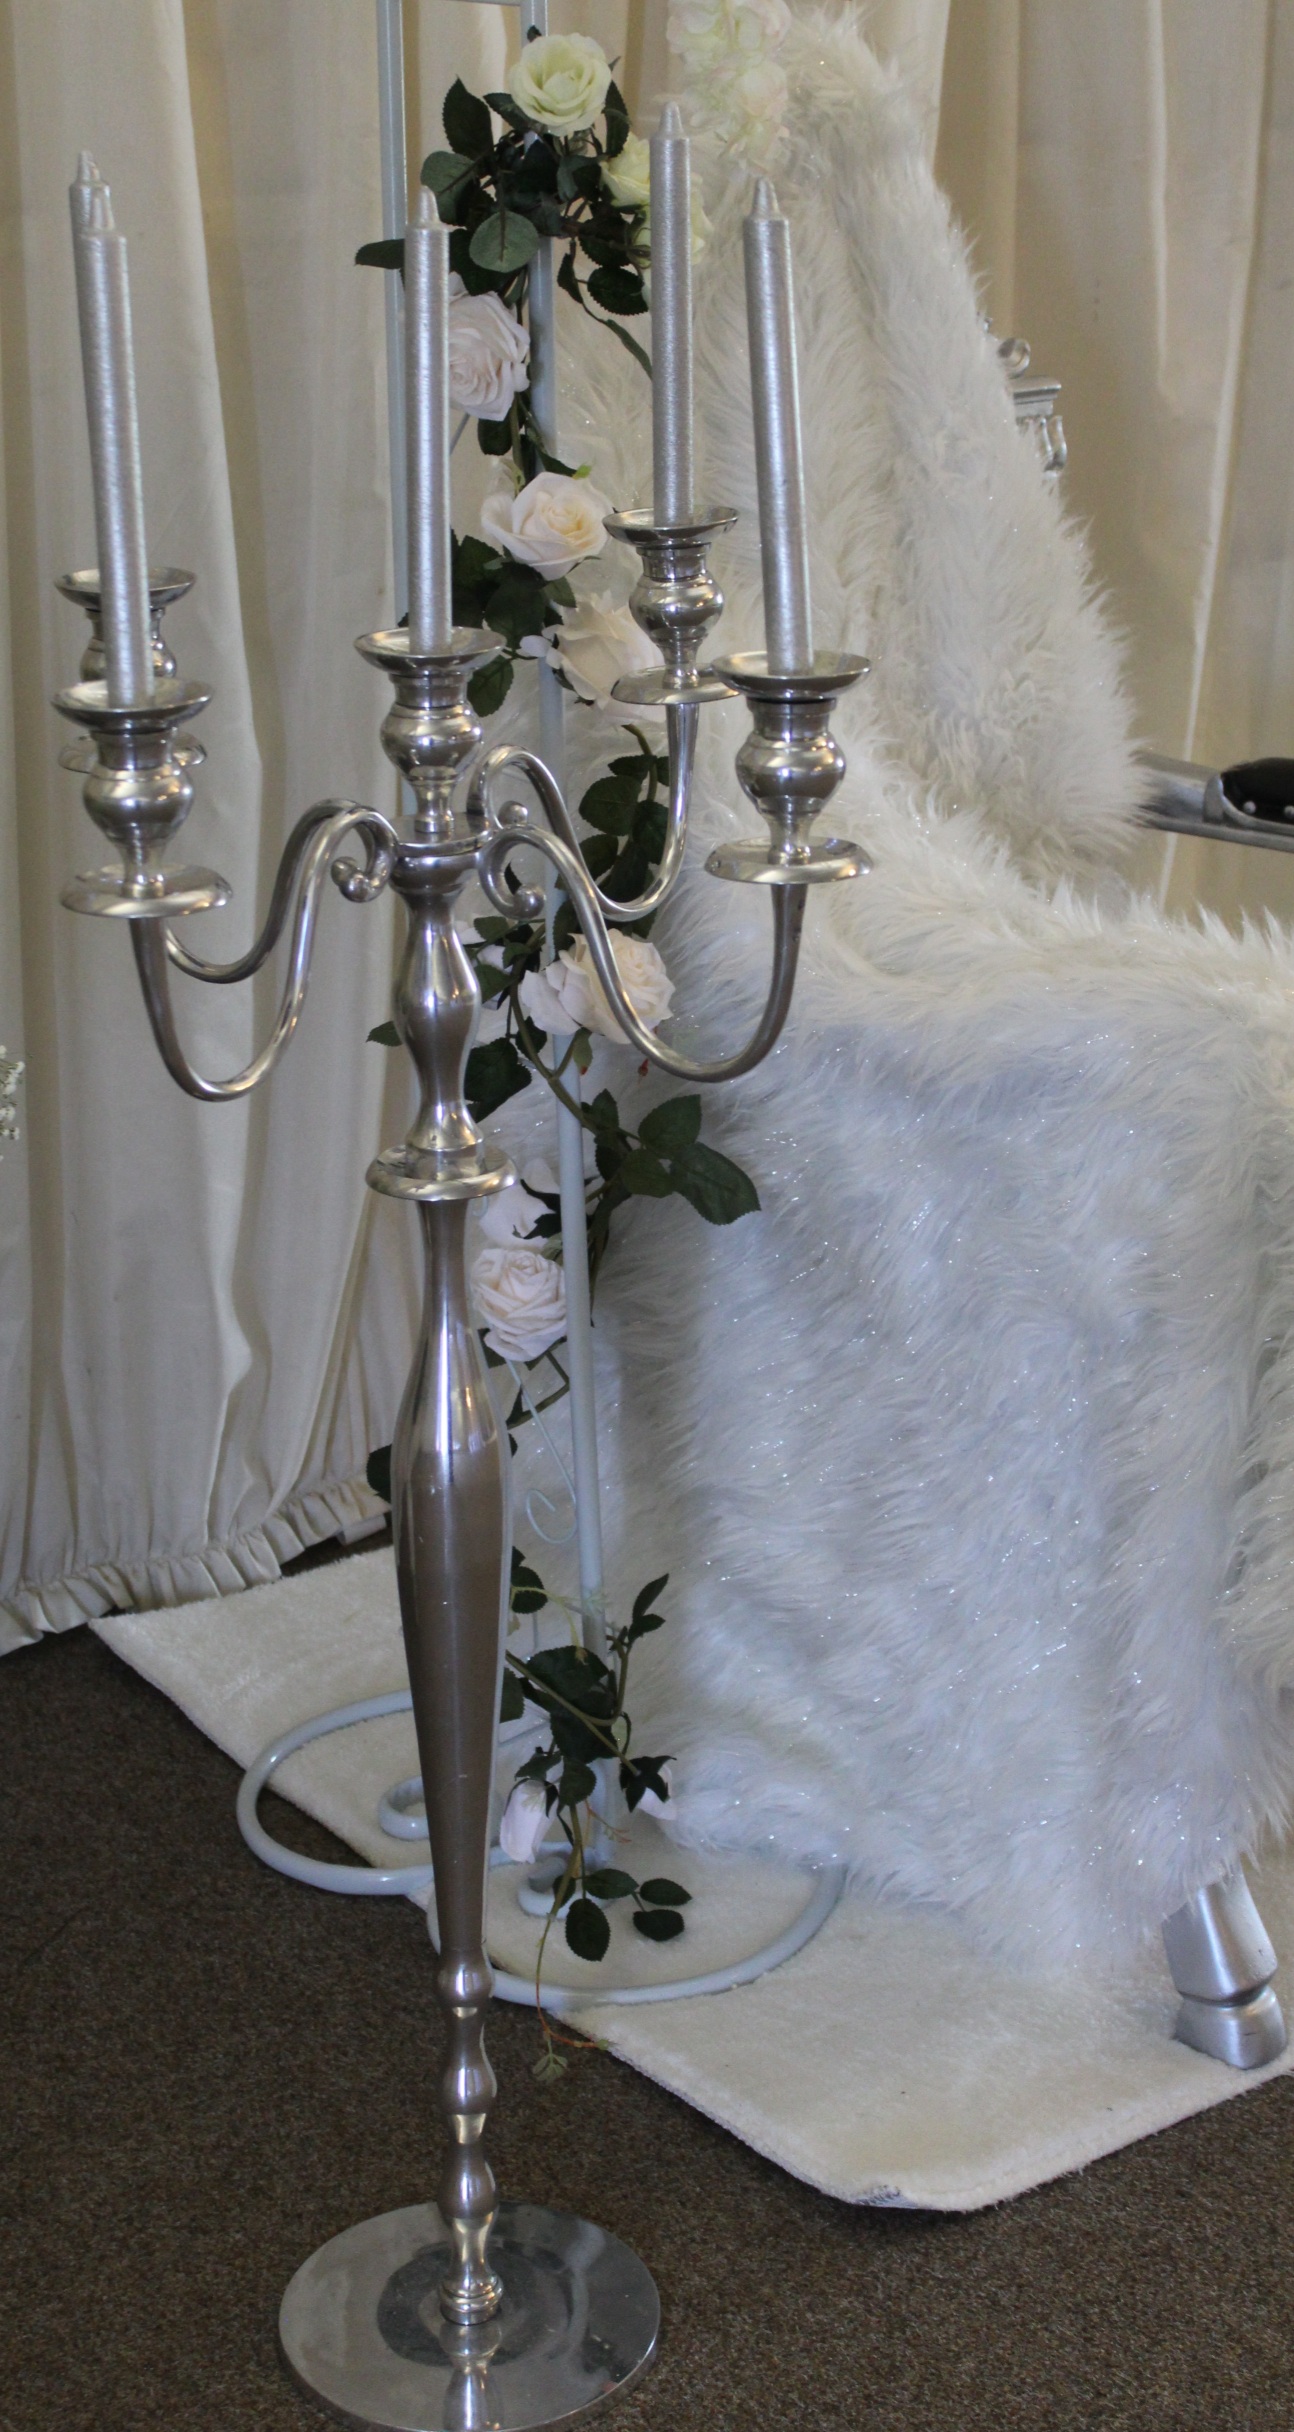 Large silver candlestick for winter wonderland wedding with white candles